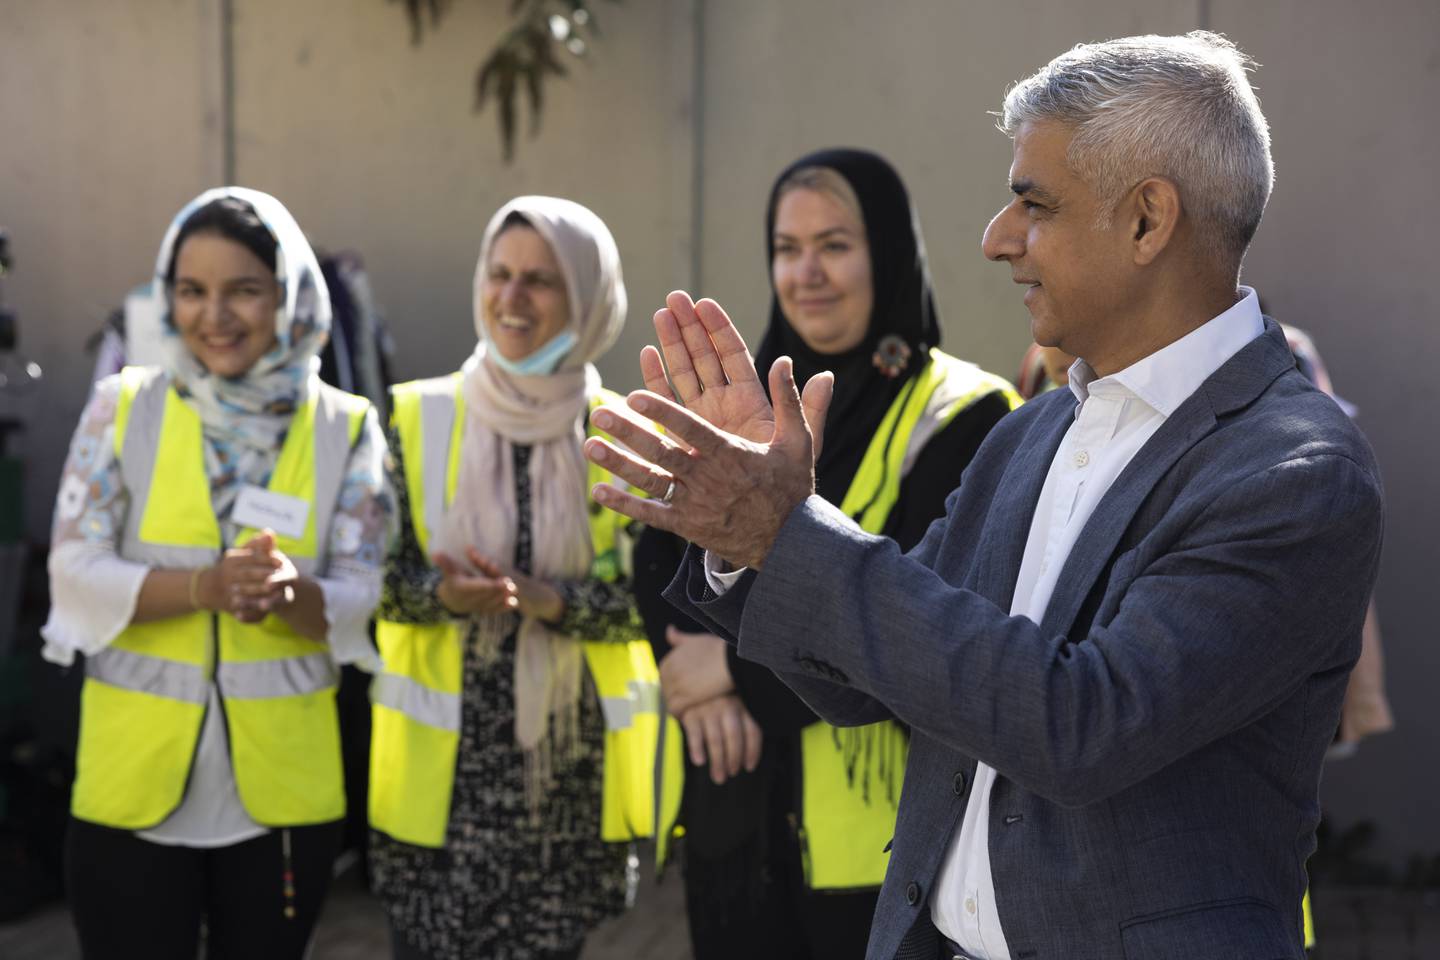 London Mayor Sadiq Khan visits a donation centre in the UK capital as he launches a fundraising effort for Afghan refugees. Getty